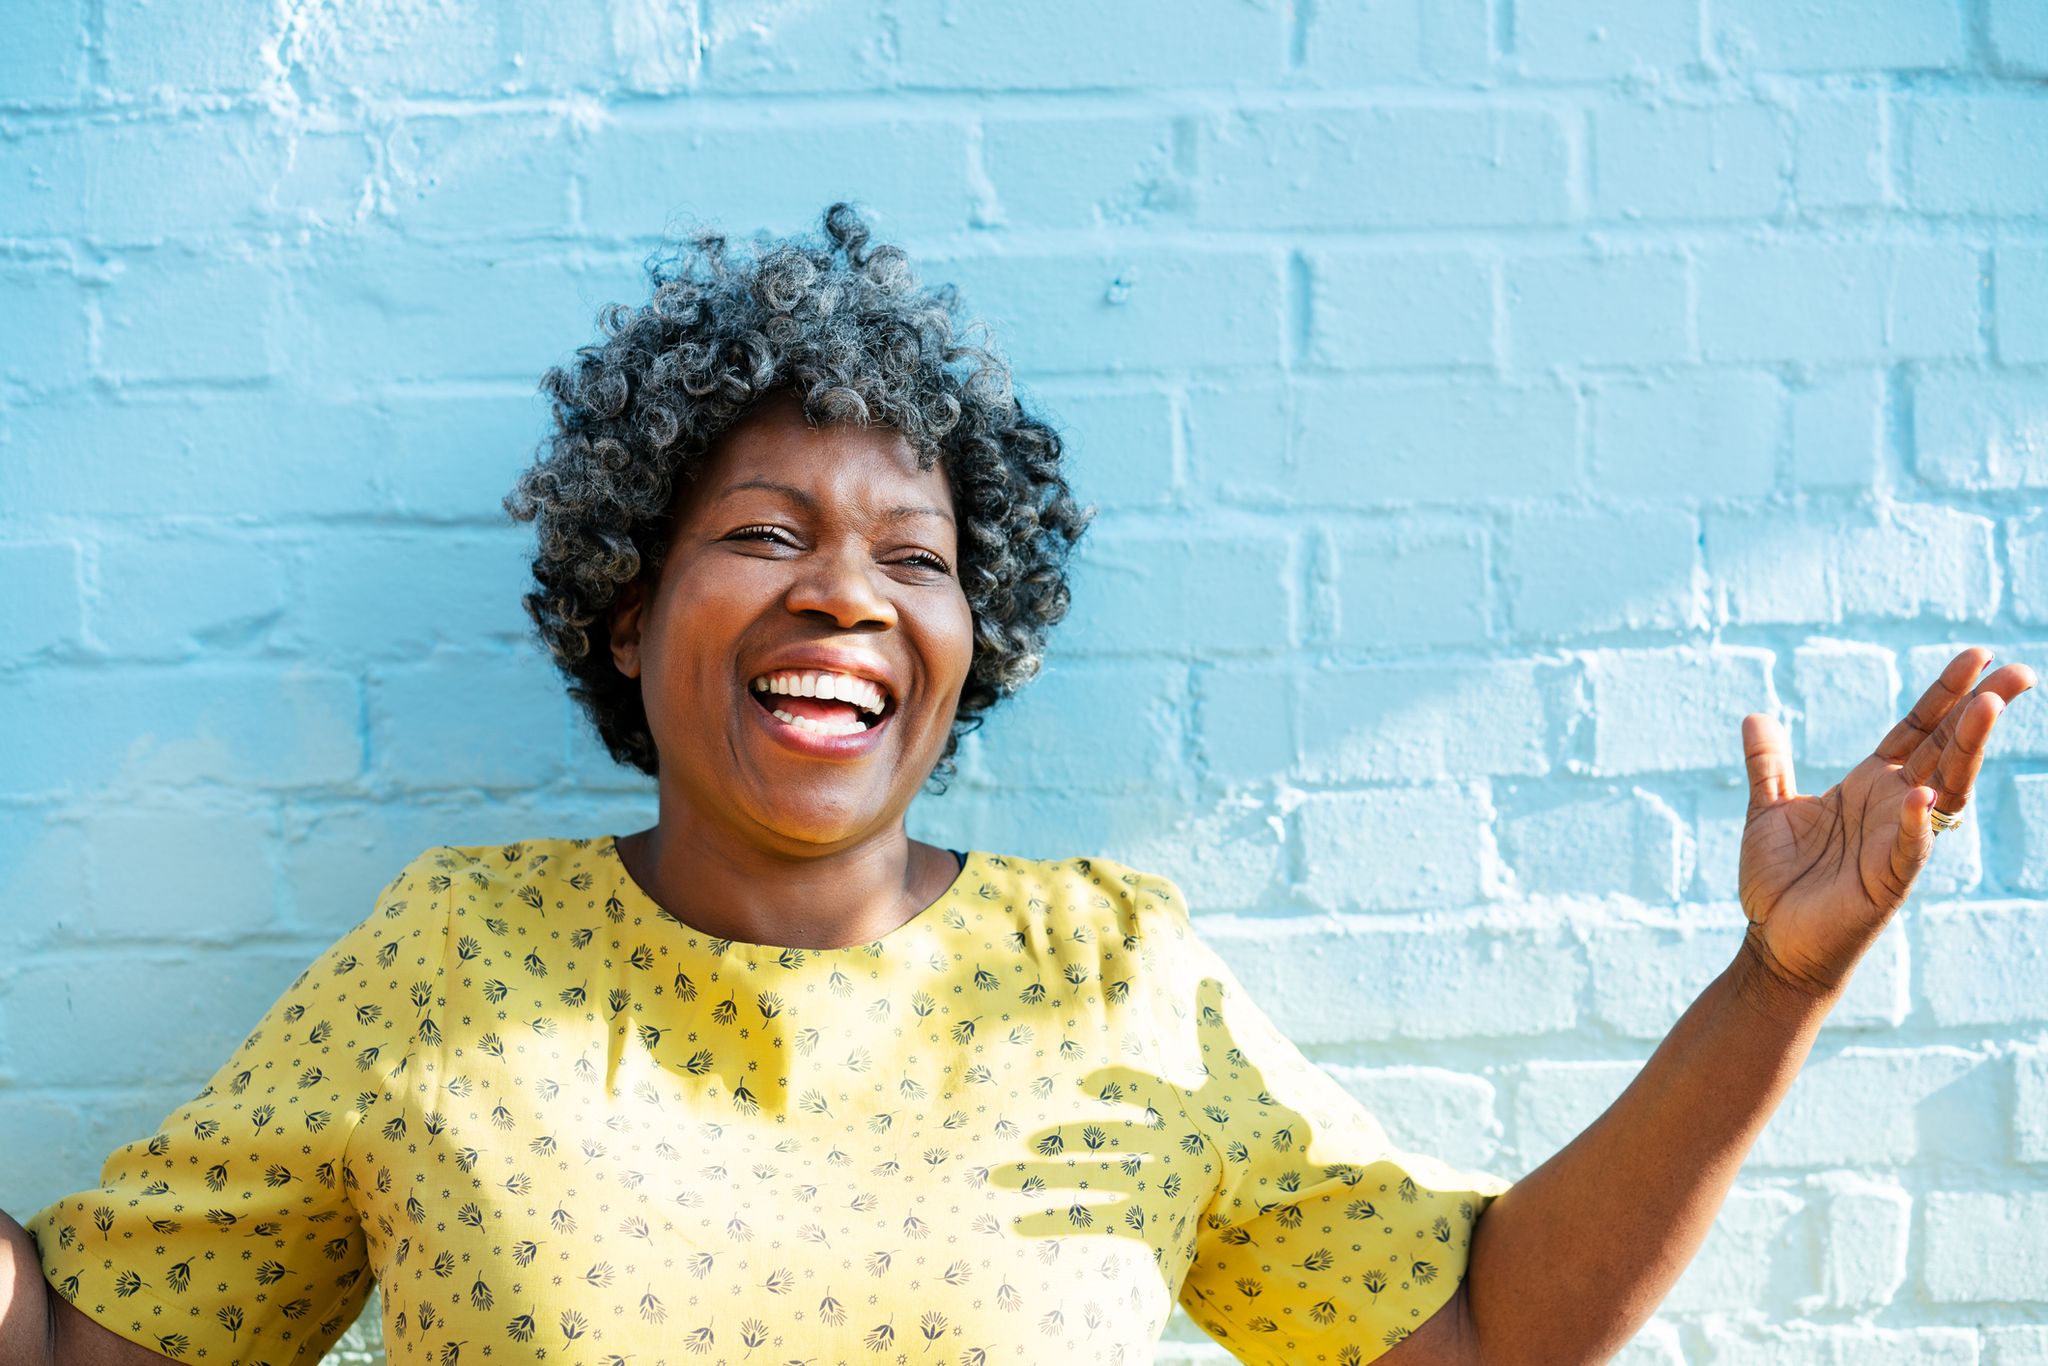 happy woman laughing with arms up